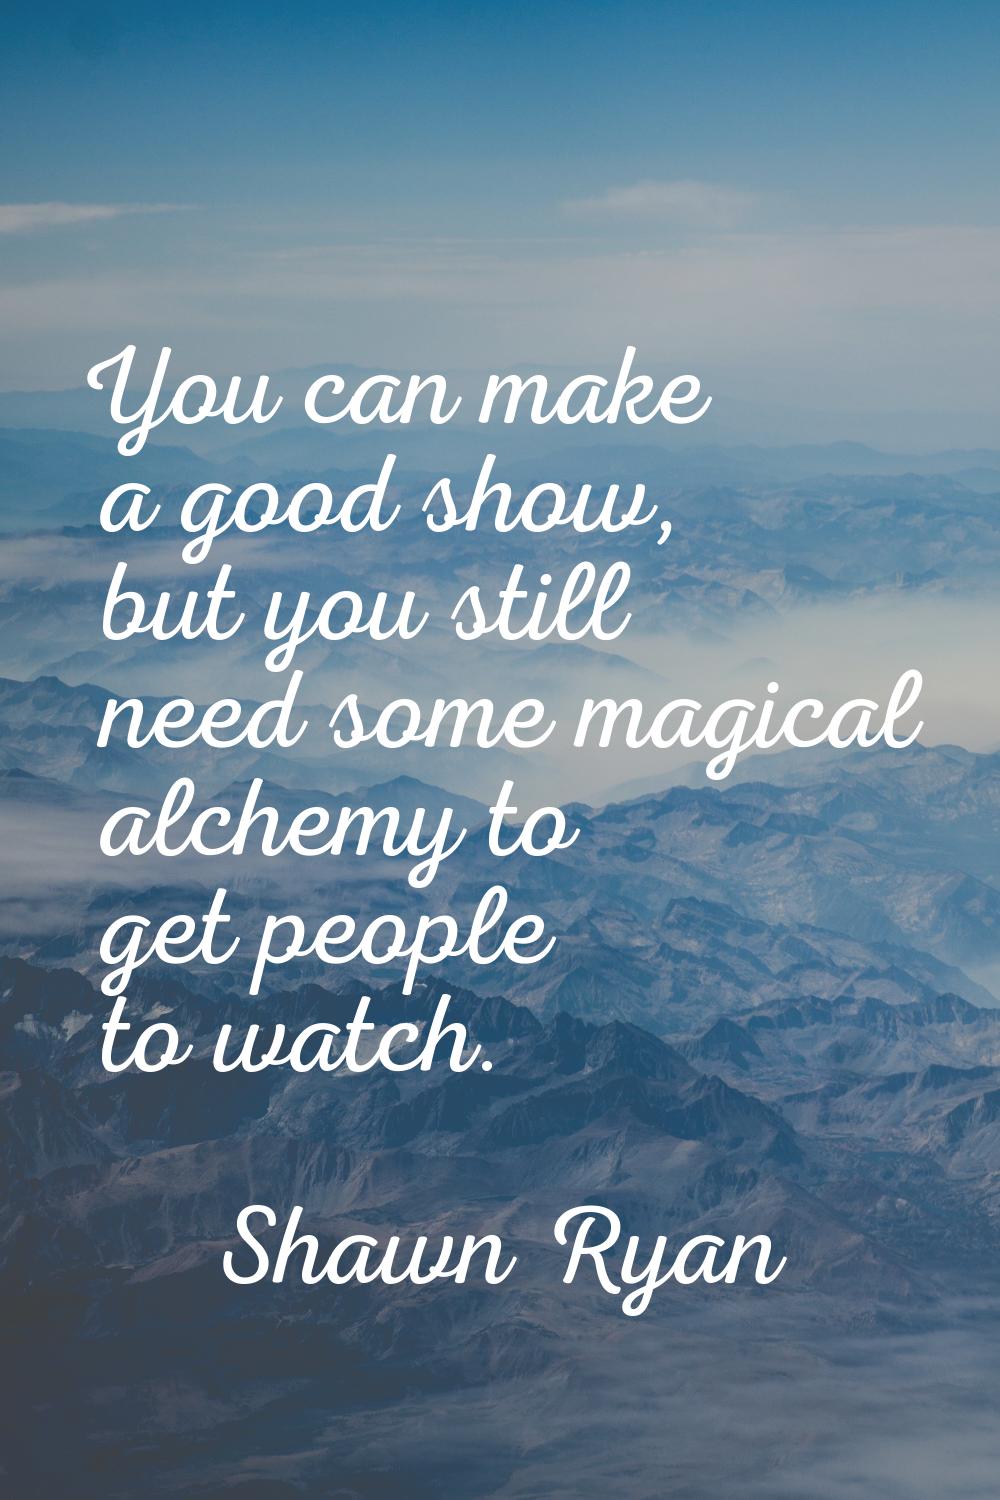 You can make a good show, but you still need some magical alchemy to get people to watch.